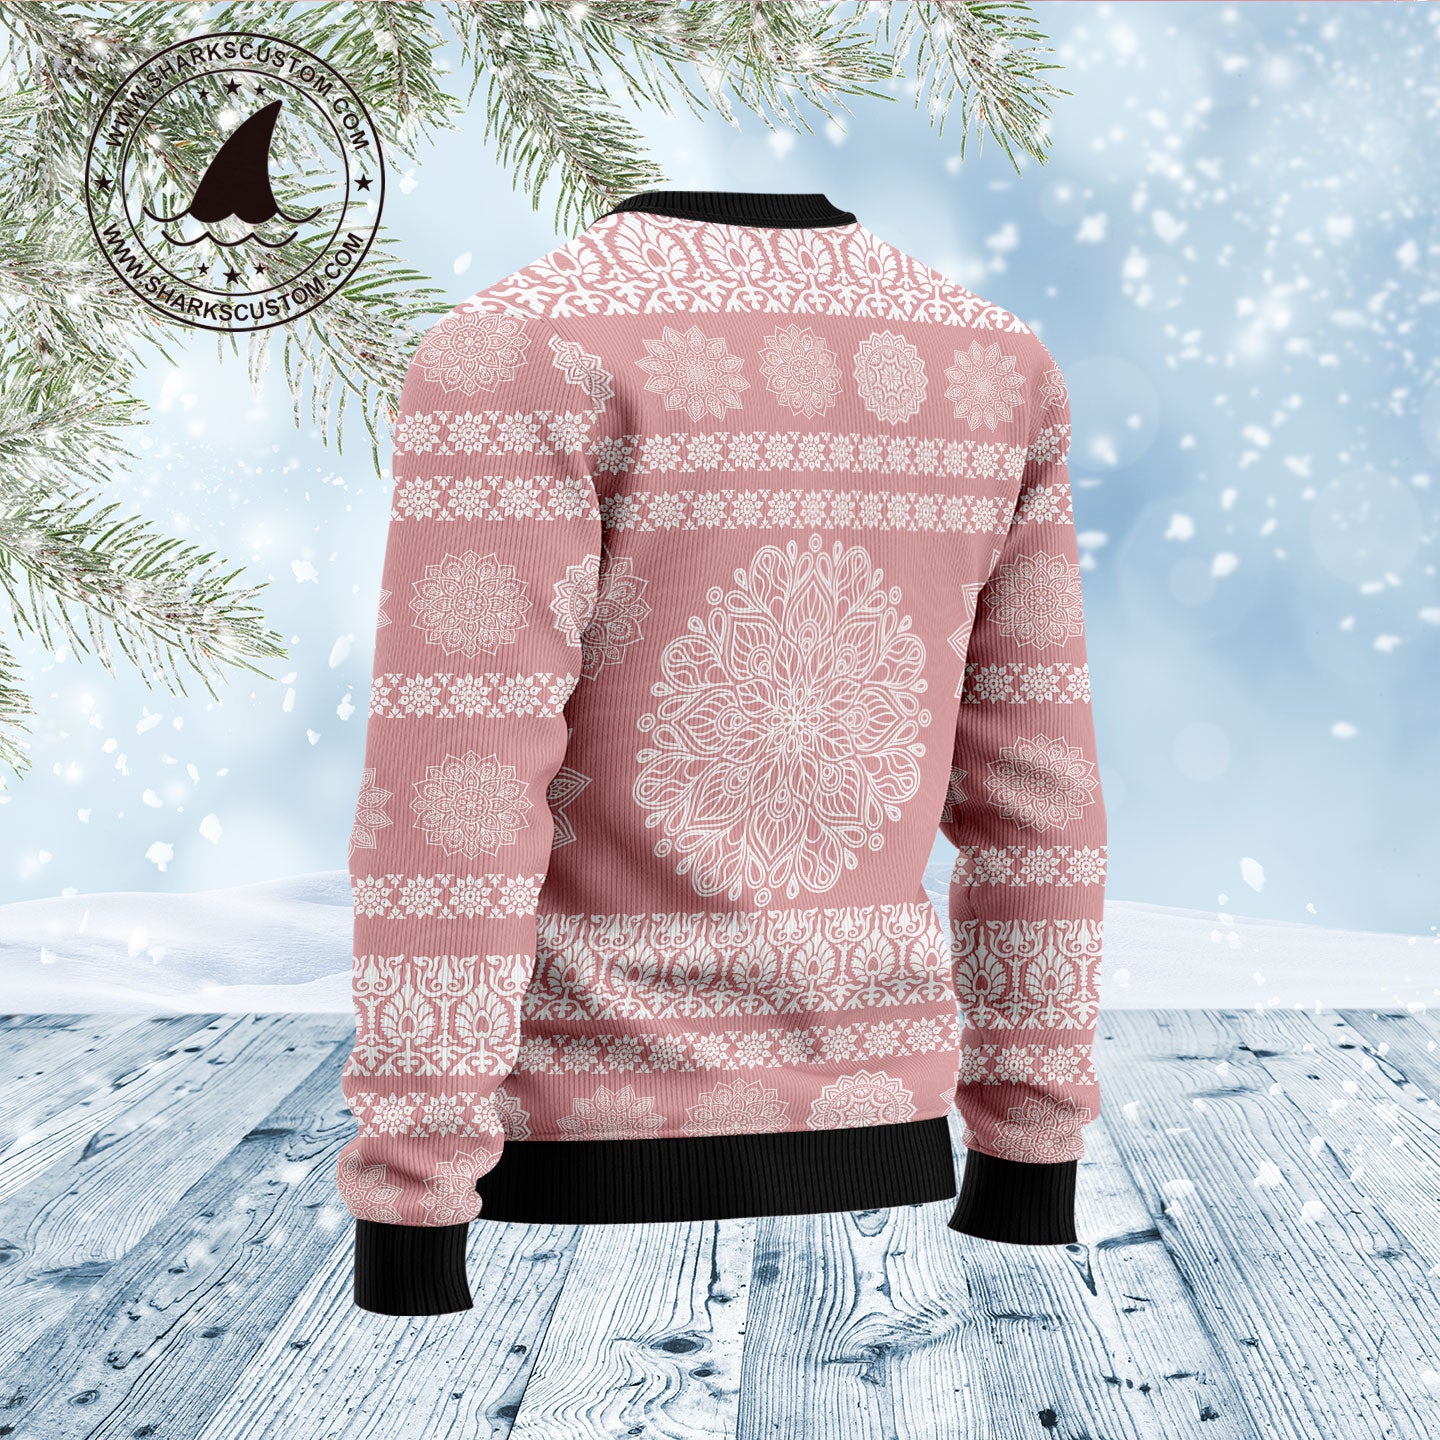 Flamingo Why Oh You D1011 Ugly Christmas Sweater